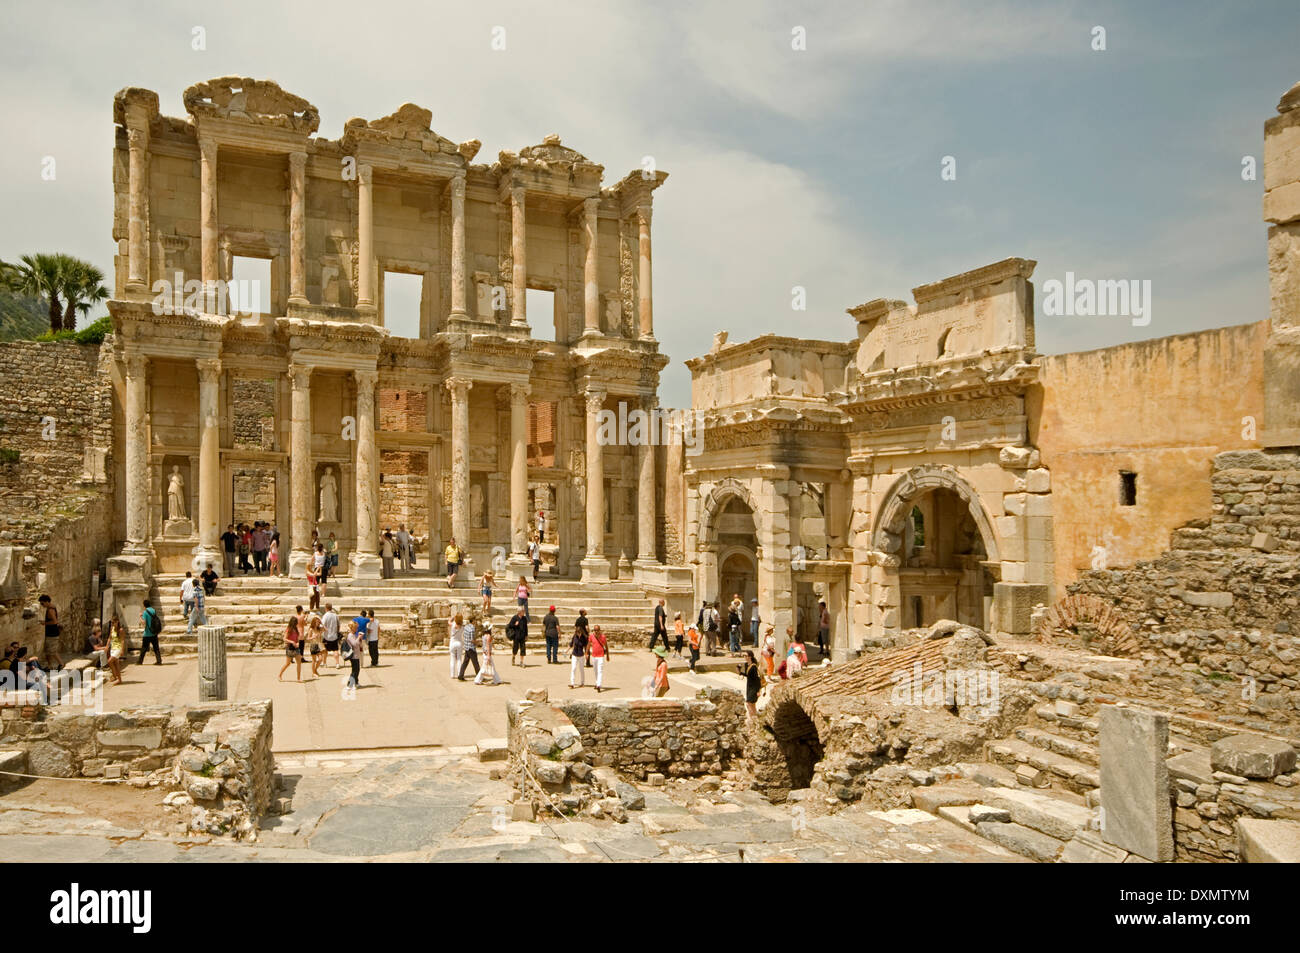 ASIA, Turkey, Ephesus, Library of Celsus (114 AD) with tourists Stock Photo